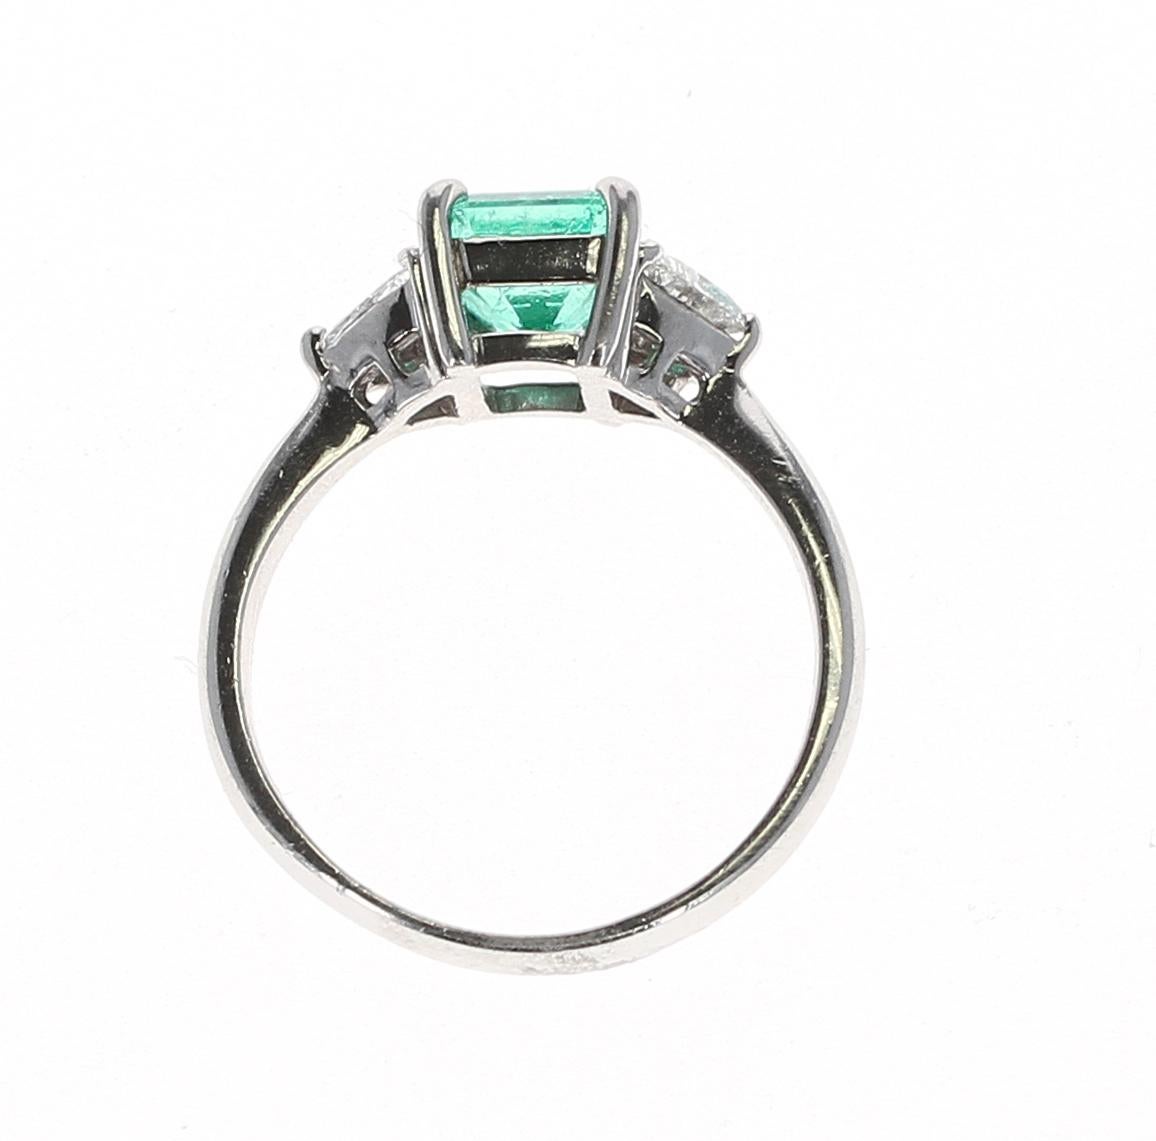 A 1.09 Carat Square-Cut Emerald Three Stone Ring made in Platinum. Diamond Weight: 0.32 carats. Ring Size 6.25. Gross Weight: 4.71 grams. 
 